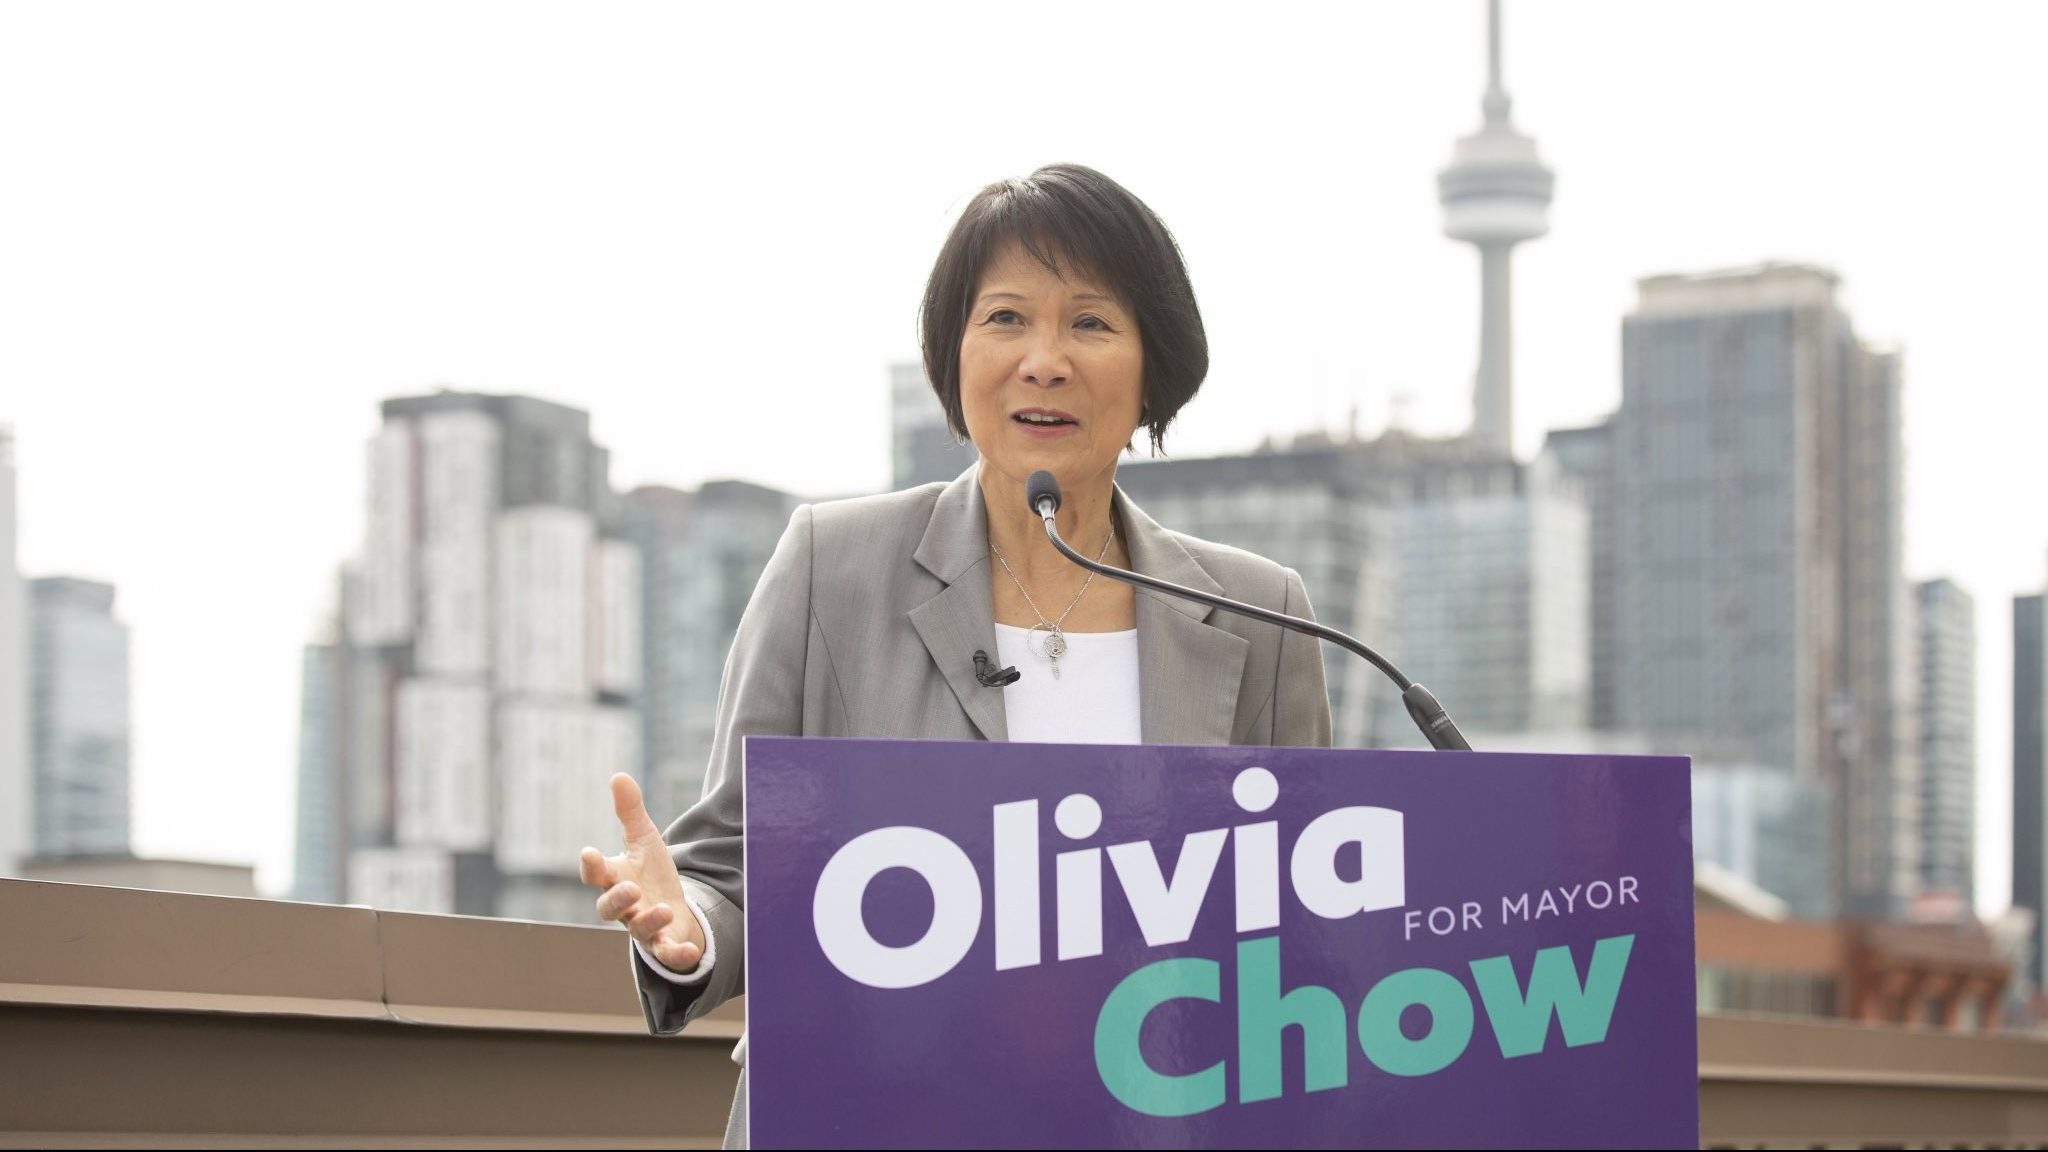 Olivia Chow widening lead in Toronto mayoral race, many voters